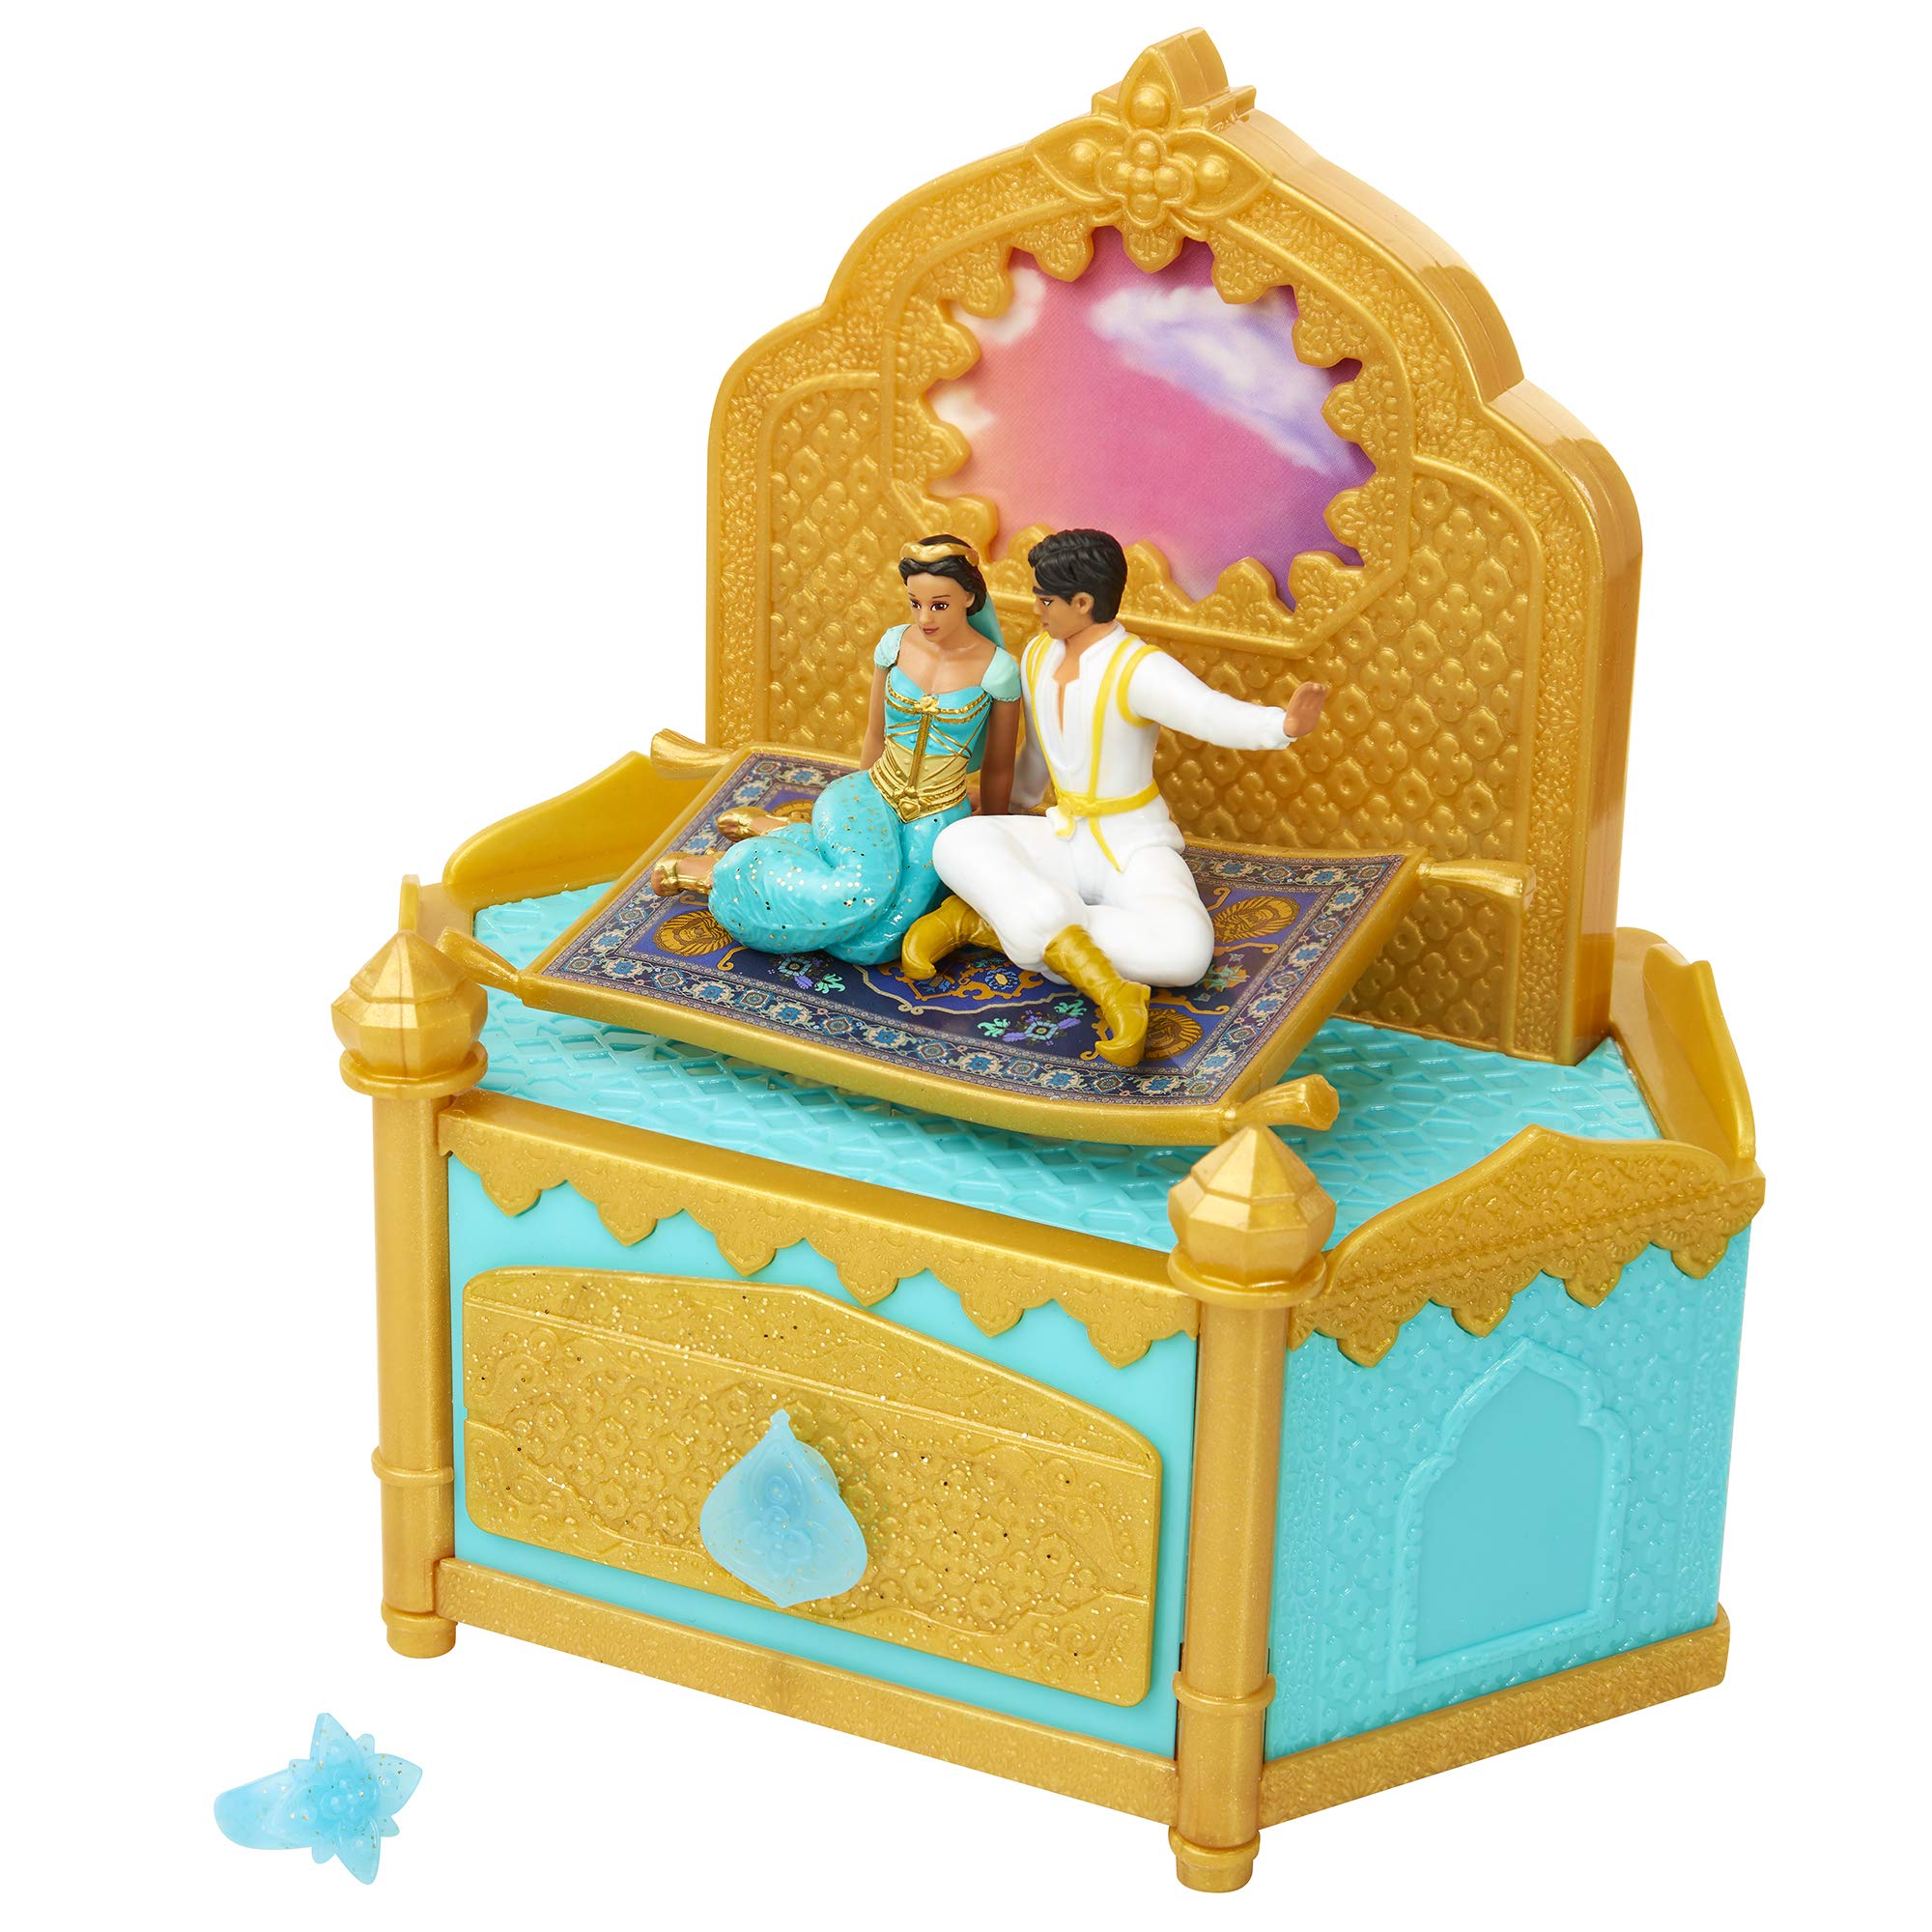 Aladdin Disney Musical Jewelry Box with Ring to Wear